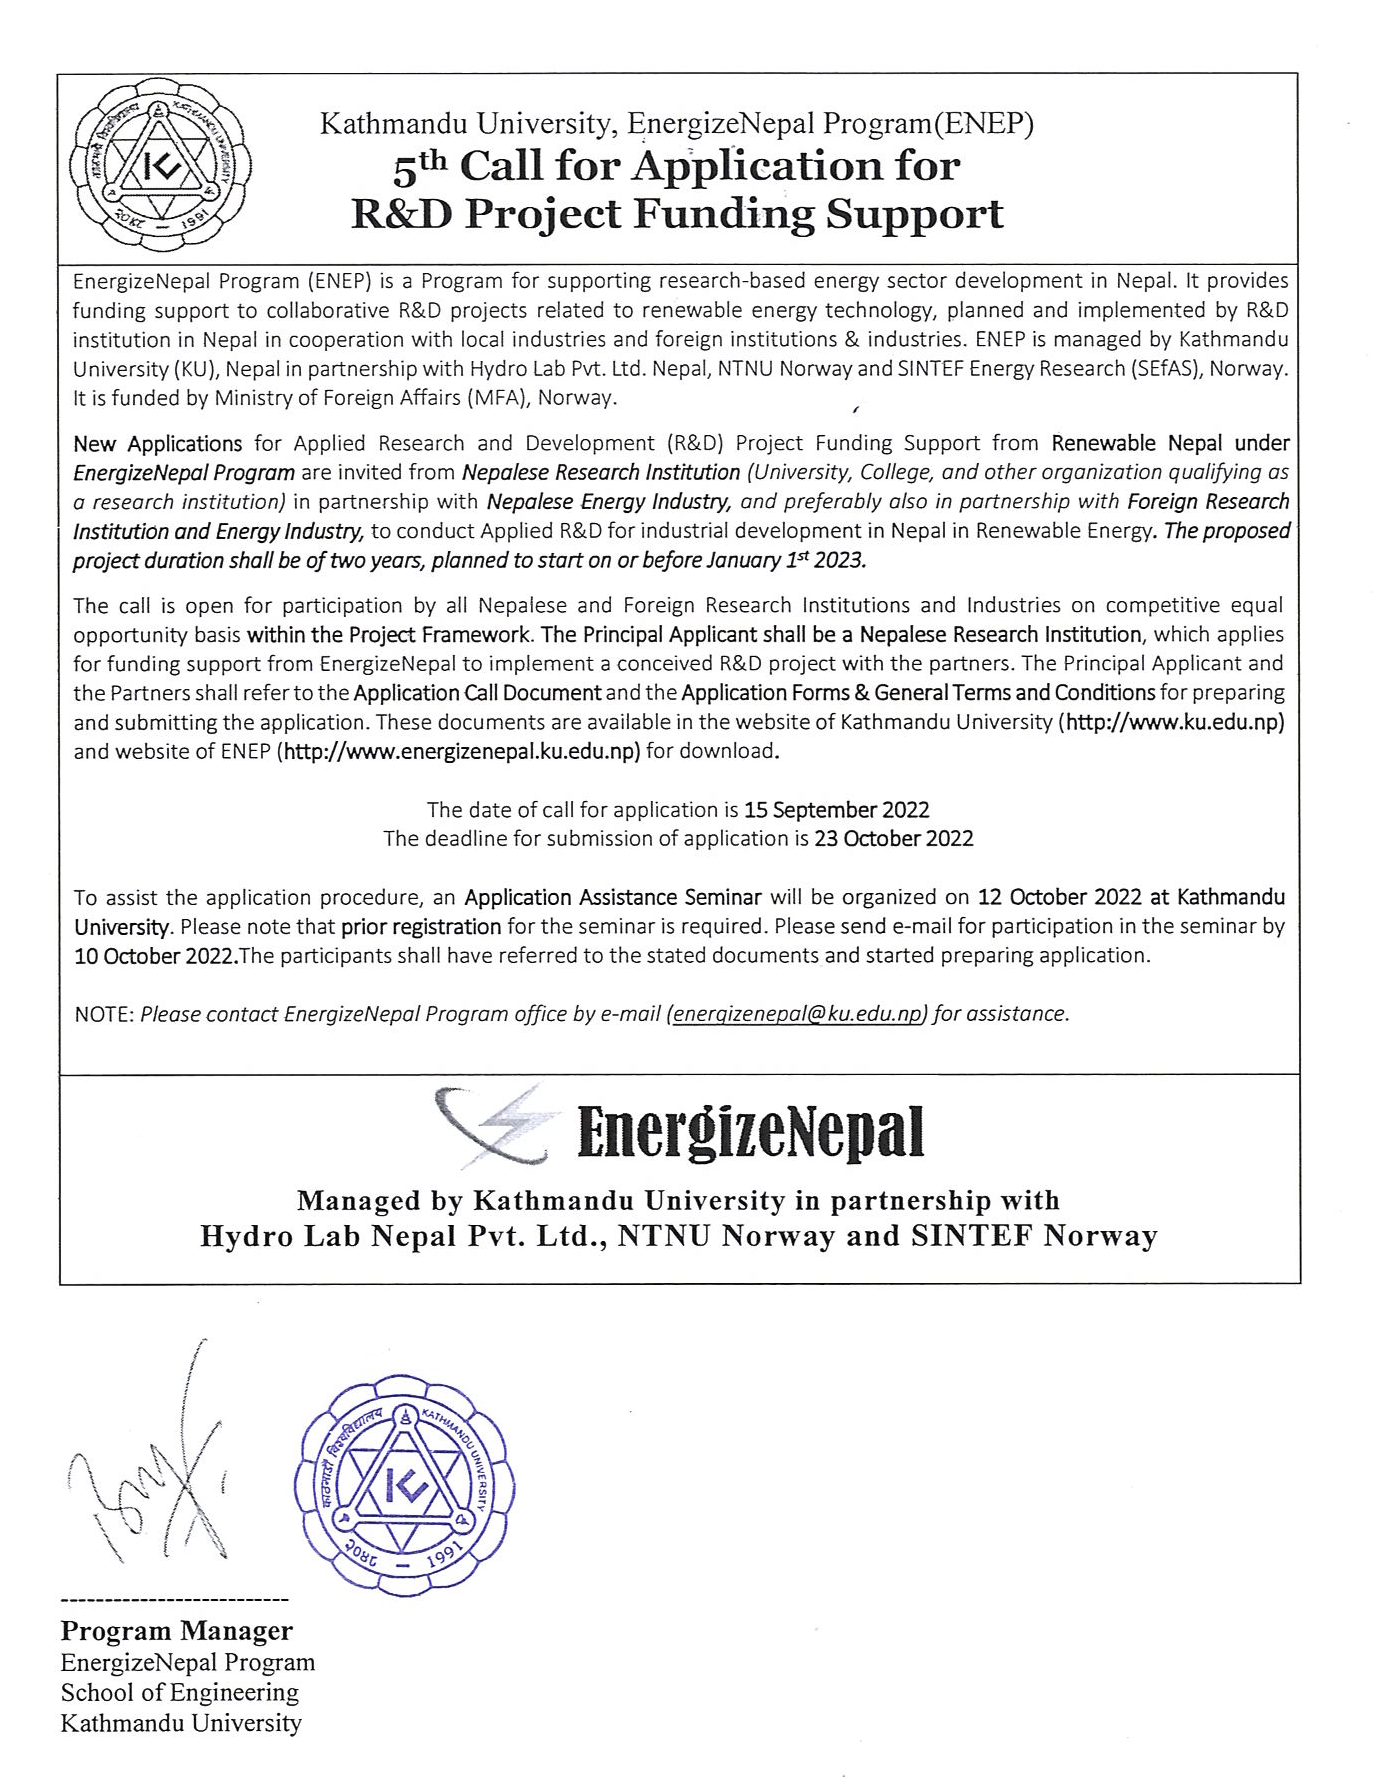 5th Call for Application for R&D Project Funding Support